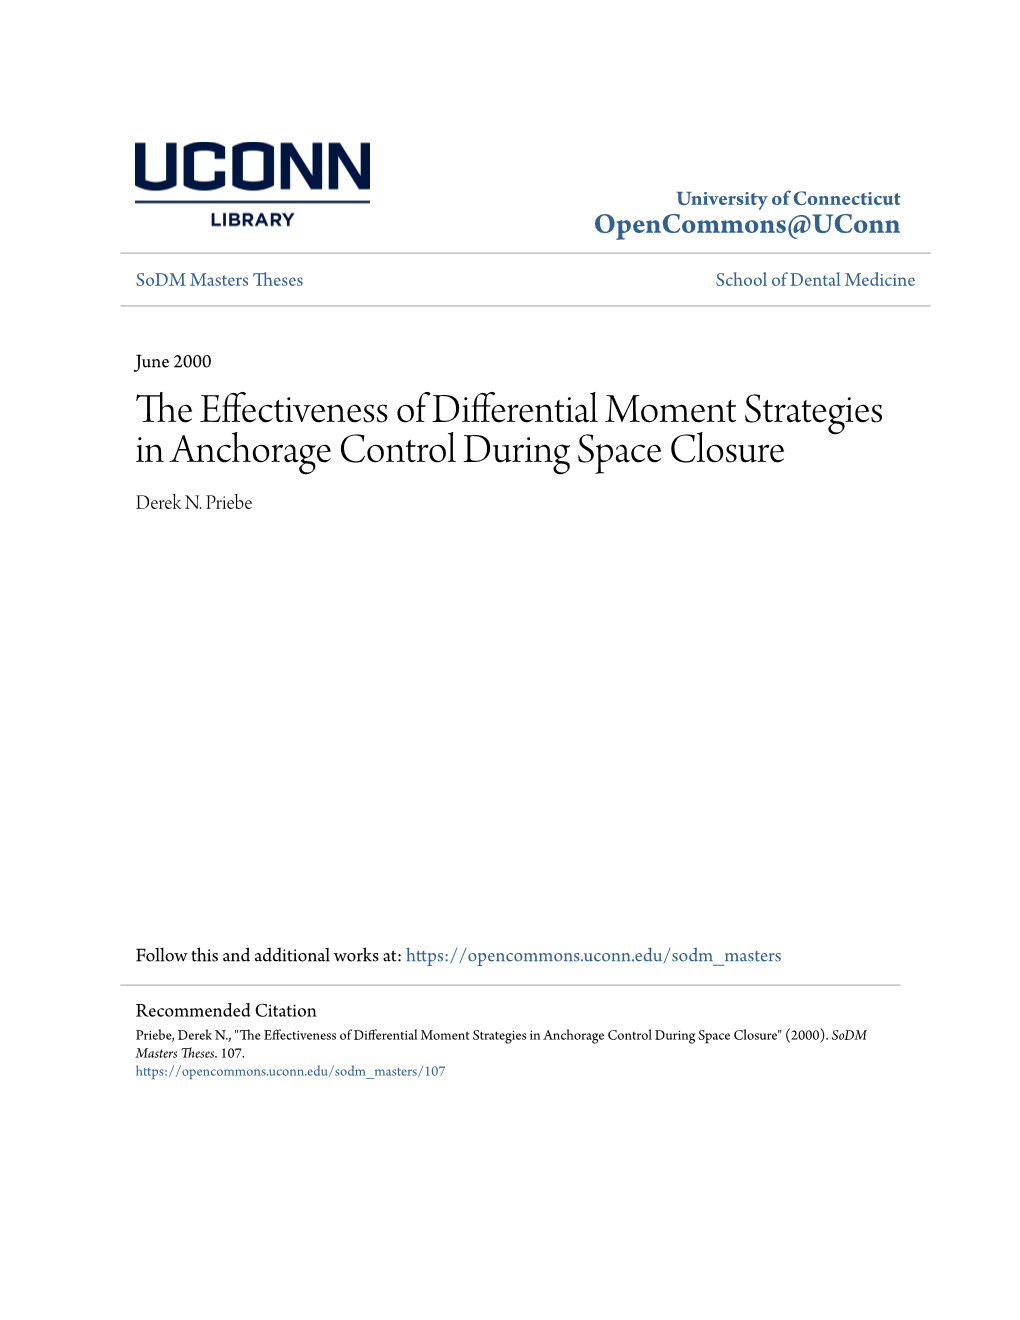 The Effectiveness of Differential Moment Strategies in Anchorage Control During Space Closure" (2000)